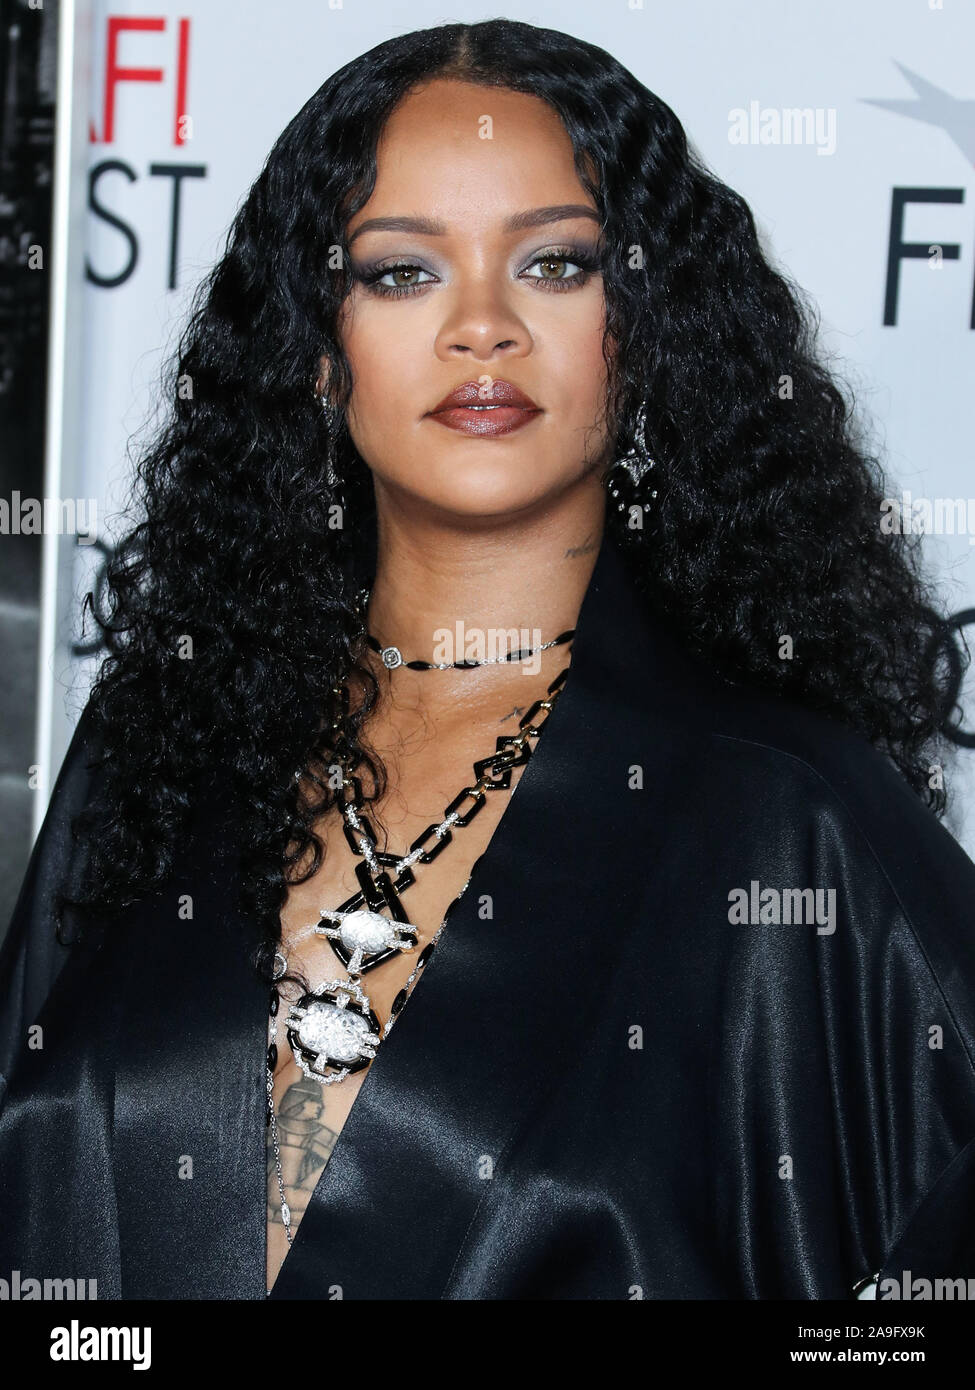 Hollywood, United States. 14th Nov, 2019. HOLLYWOOD, LOS ANGELES, CALIFORNIA, USA - NOVEMBER 14: Singer Rihanna wearing a John Galliano evening coat from William Vintage along with a necklace and bracelets by David Webb arrives at the AFI FEST 2019 - Opening Night Gala - Premiere Of Universal Pictures' 'Queen And Slim' held at the TCL Chinese Theatre IMAX on November 14, 2019 in Hollywood, Los Angeles, California, United States. (Photo by Xavier Collin/Image Press Agency) Credit: Image Press Agency/Alamy Live News Stock Photo